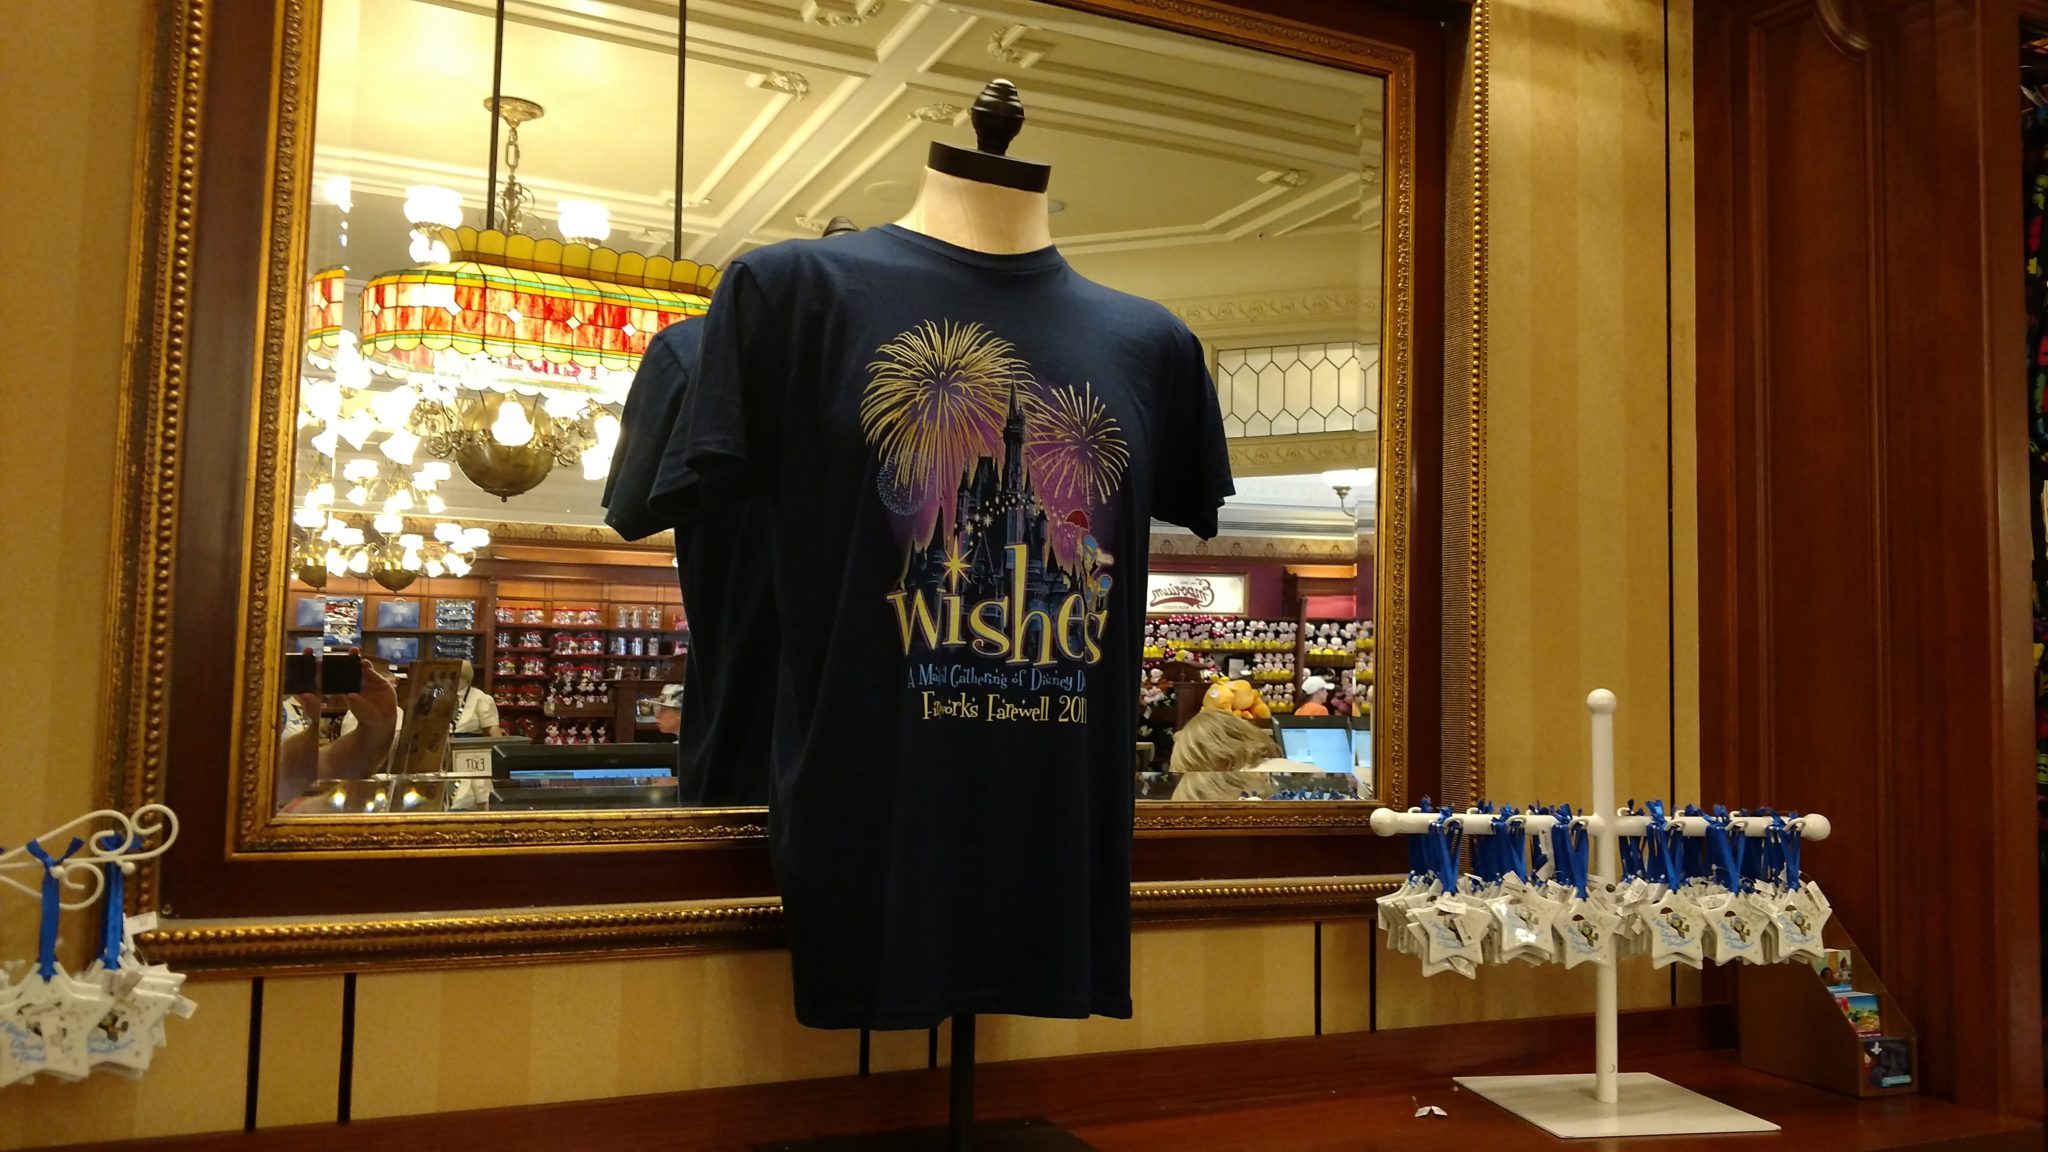 New Limited Edition Wishes Merchandise being offered at the Emporium in the Magic Kingdom